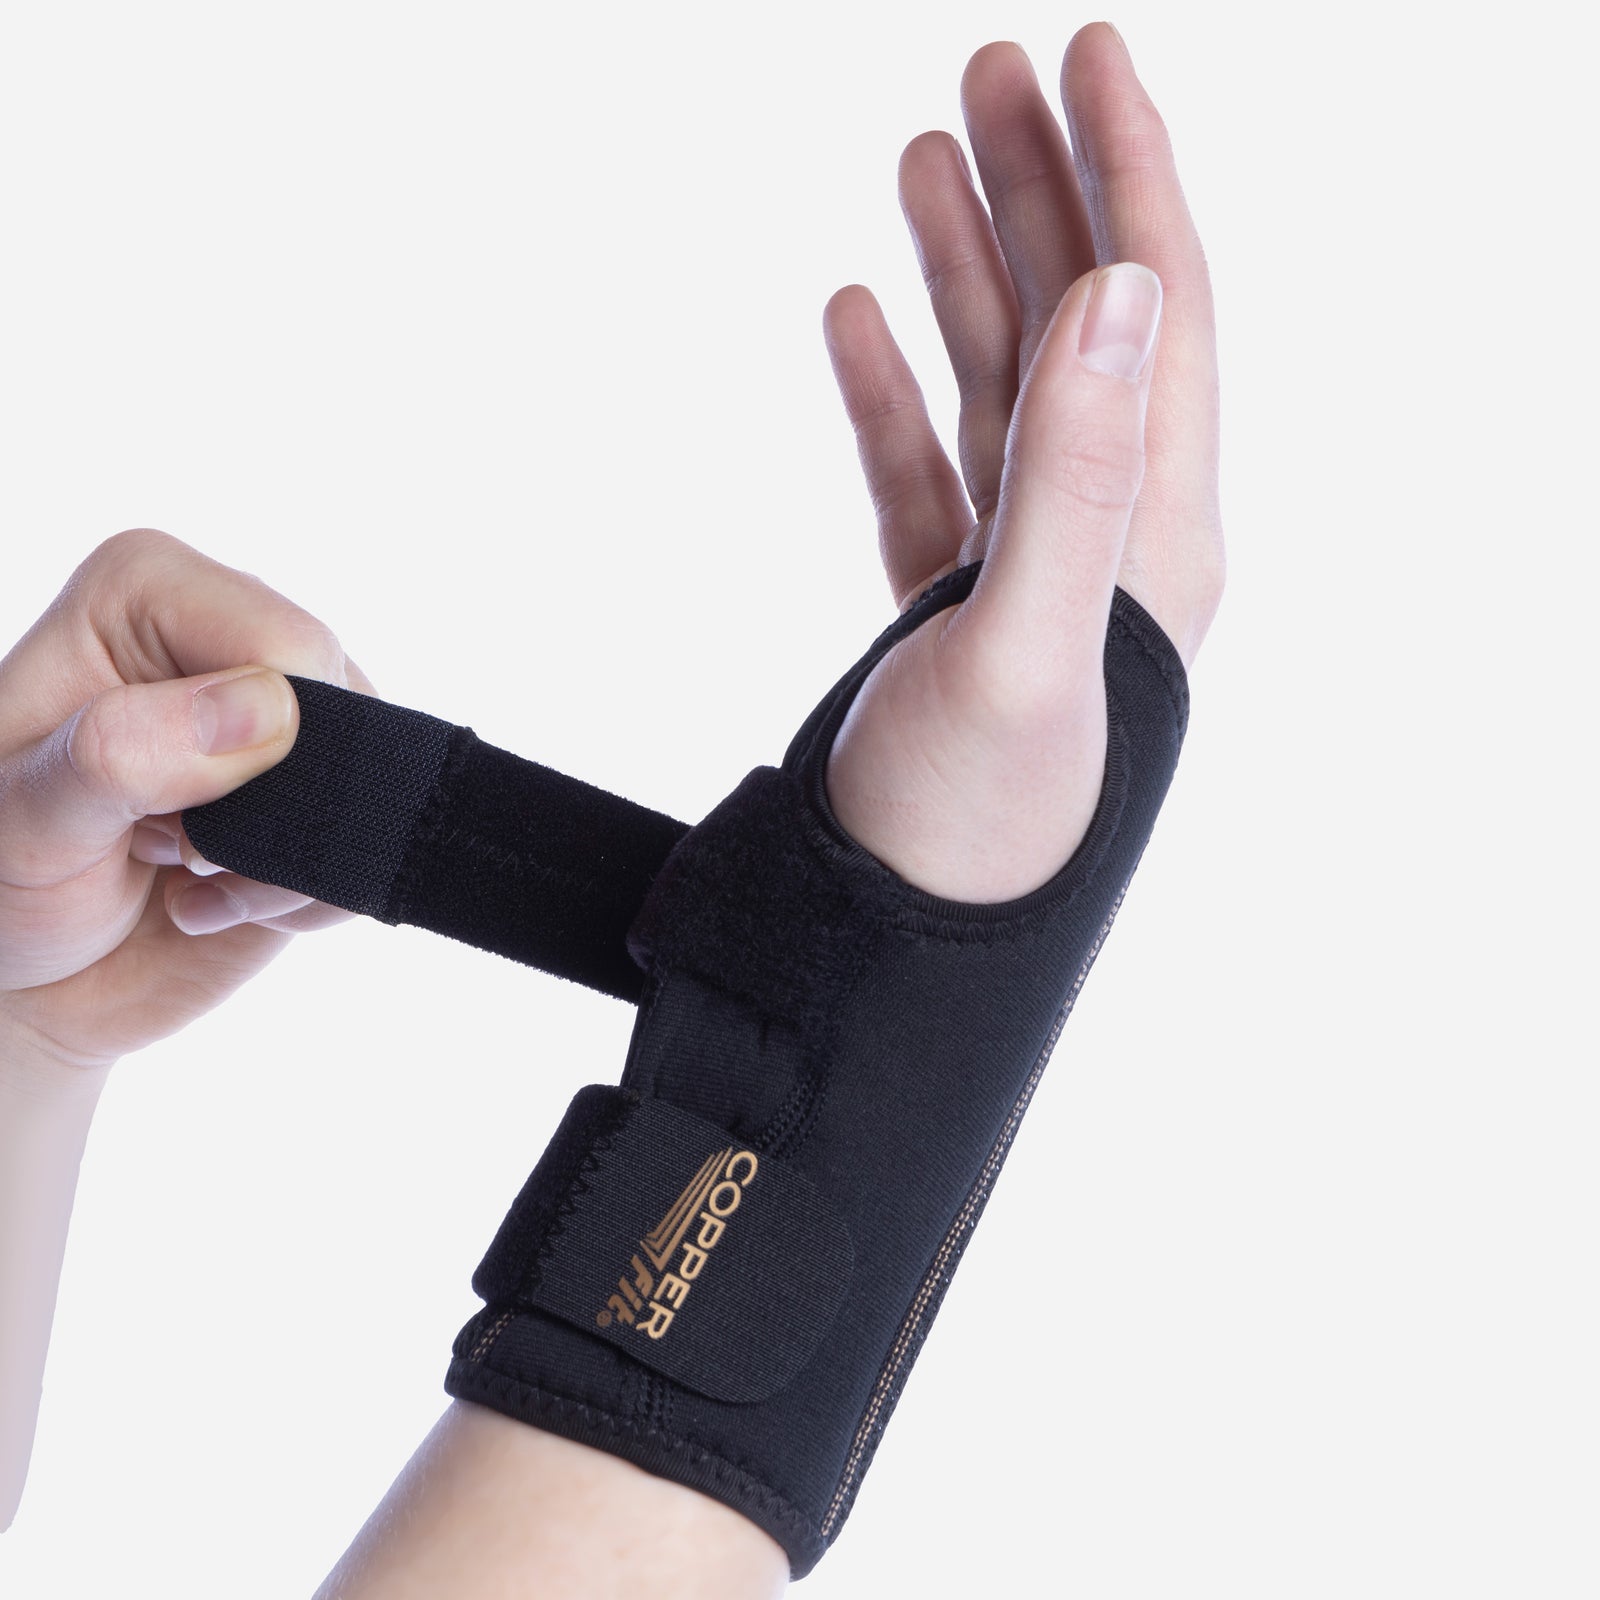 Best Deal in Canada  Copper Fit Wrist Relief Compression Rhand-L Xl  HB-CFSPBRCRXL - Canada's best deals on Electronics, TVs, Unlocked Cell  Phones, Macbooks, Laptops, Kitchen Appliances, Toys, Bed and Bathroom  products